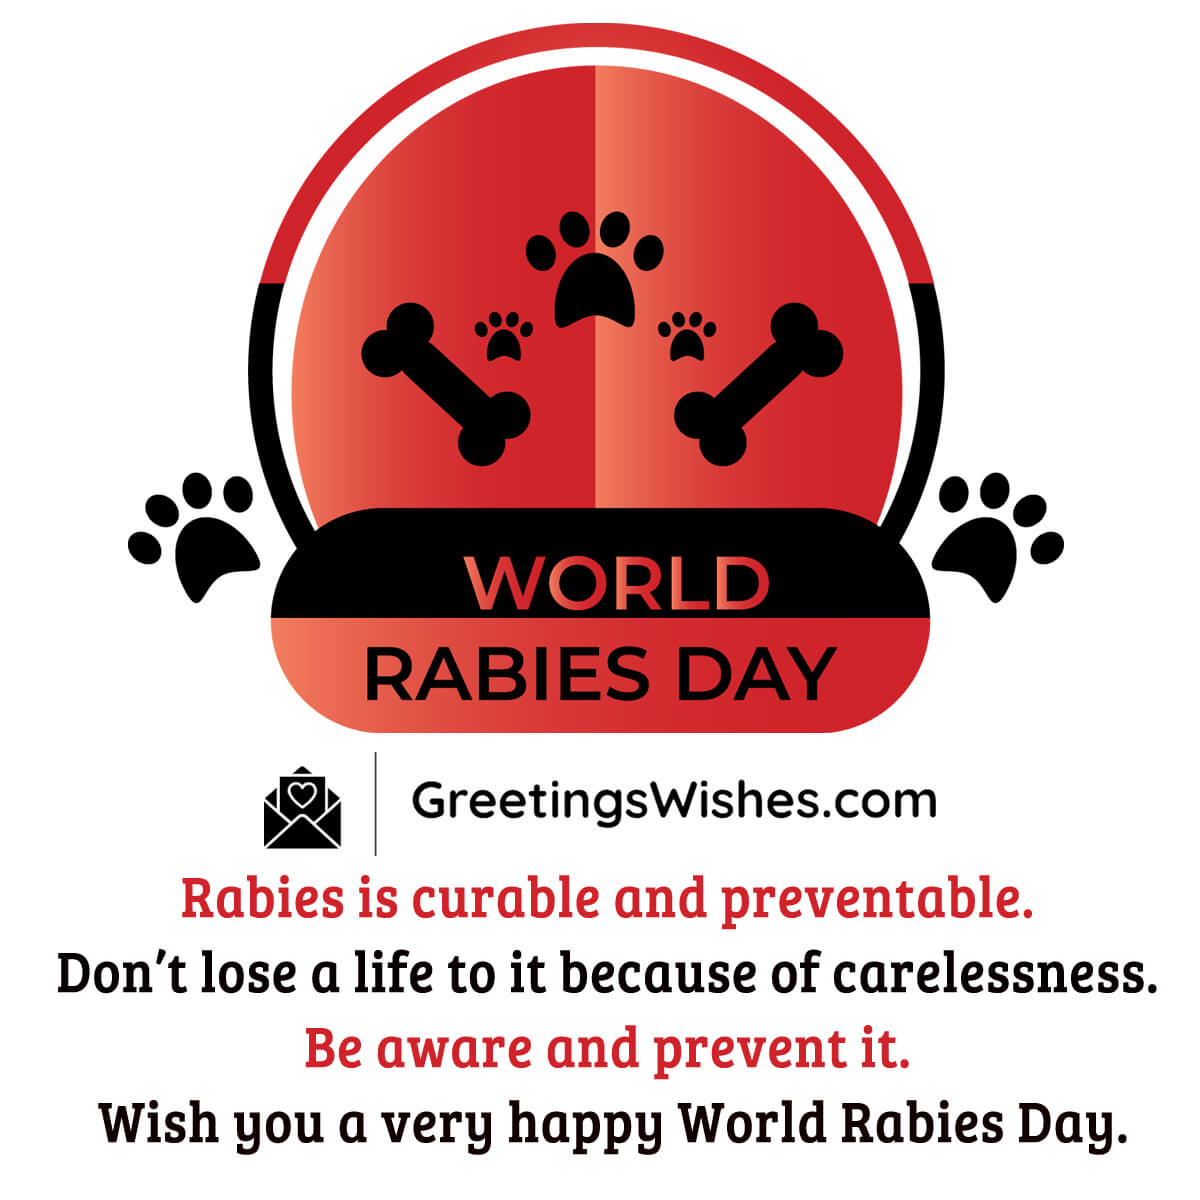 World Rabies Day Message